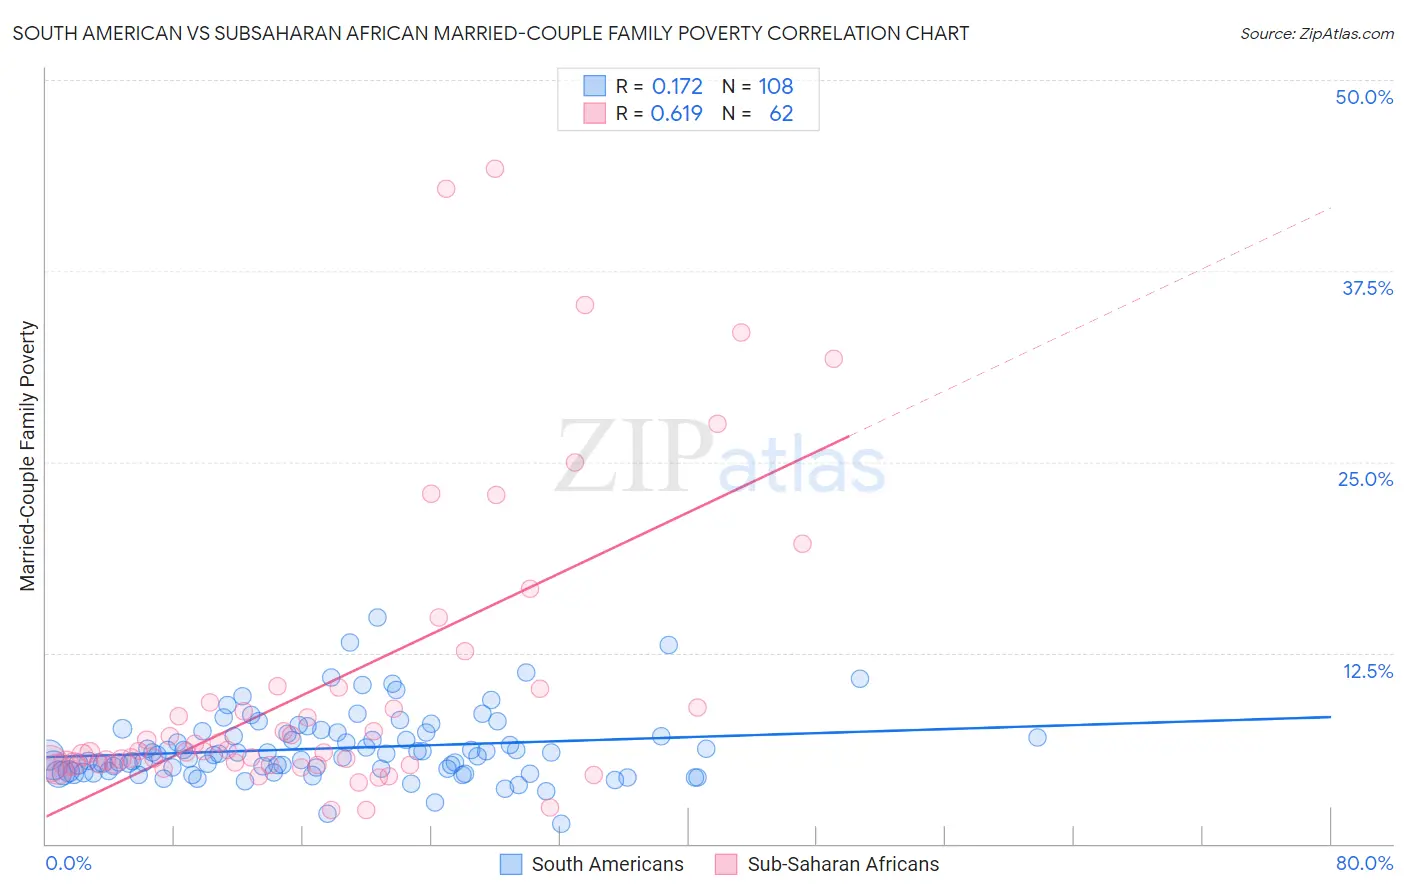 South American vs Subsaharan African Married-Couple Family Poverty